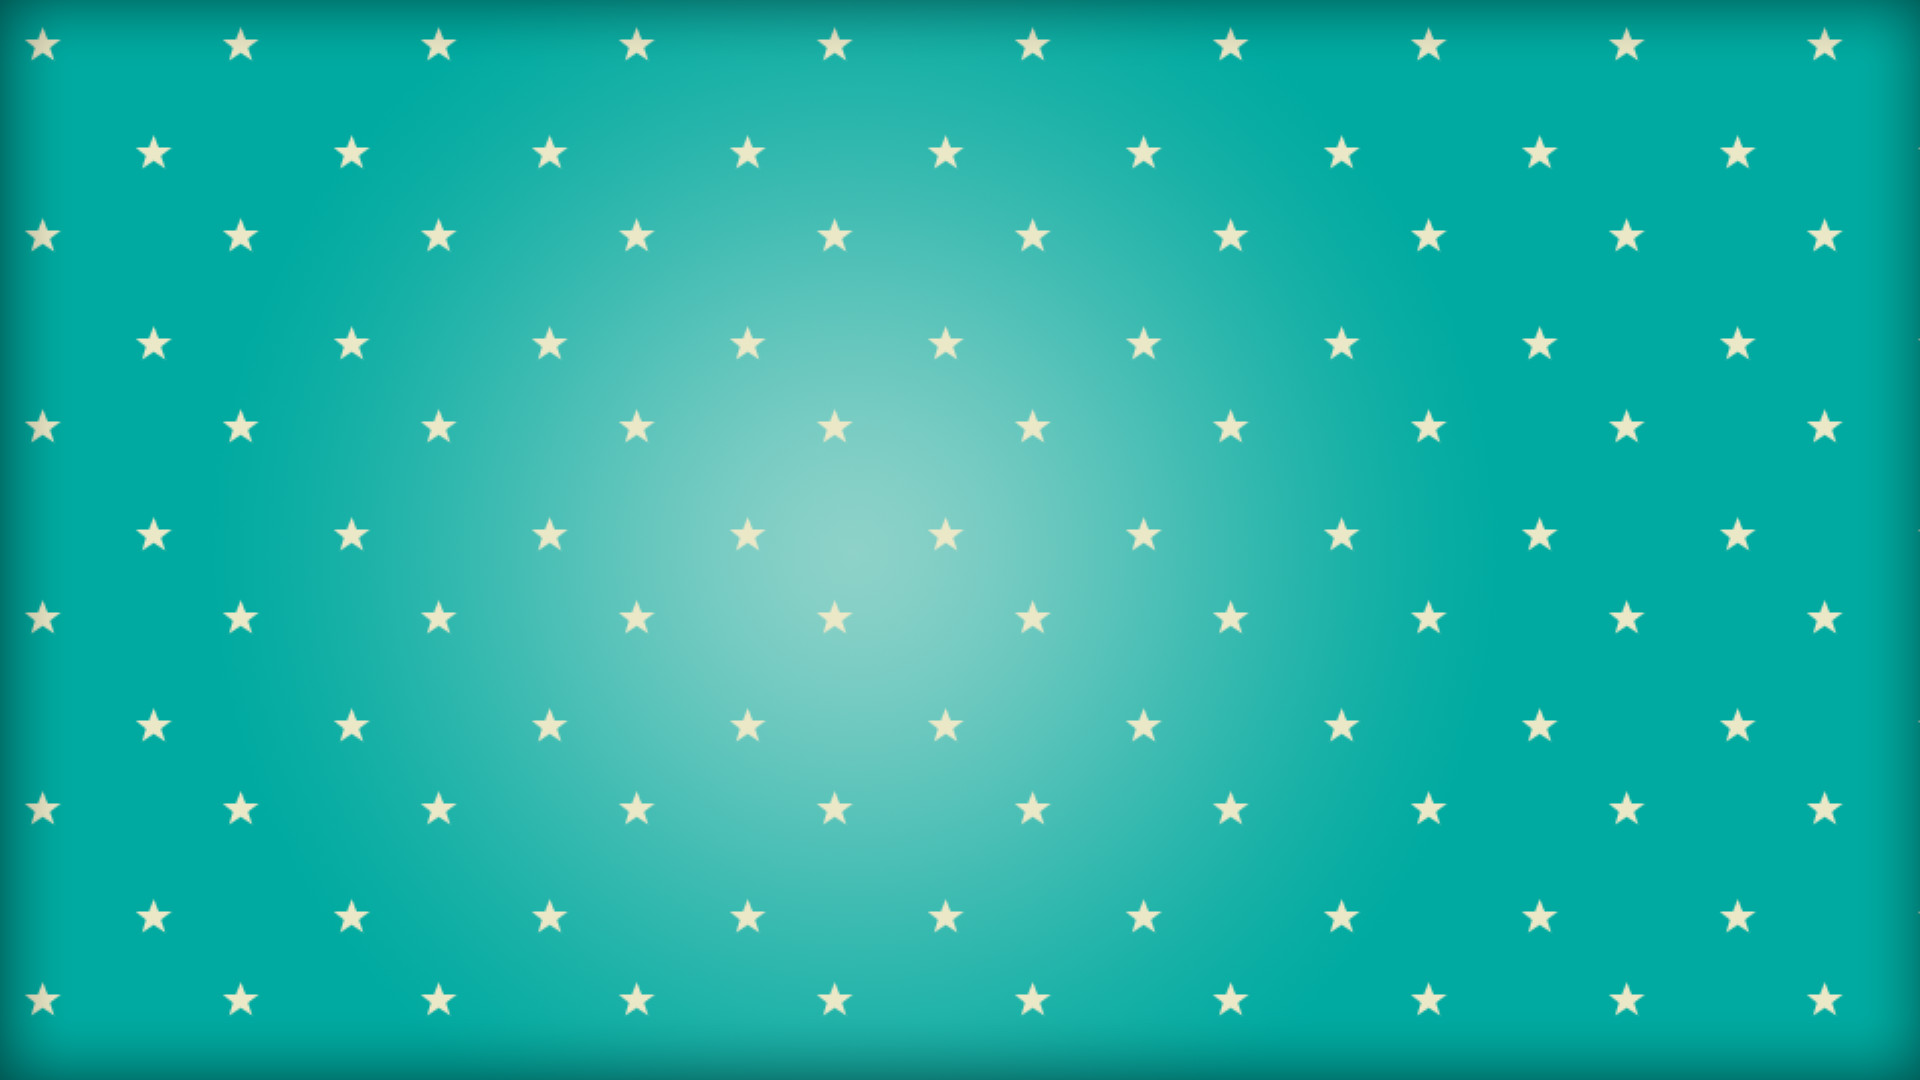 1920x1080 Pretty background with stars. Free download